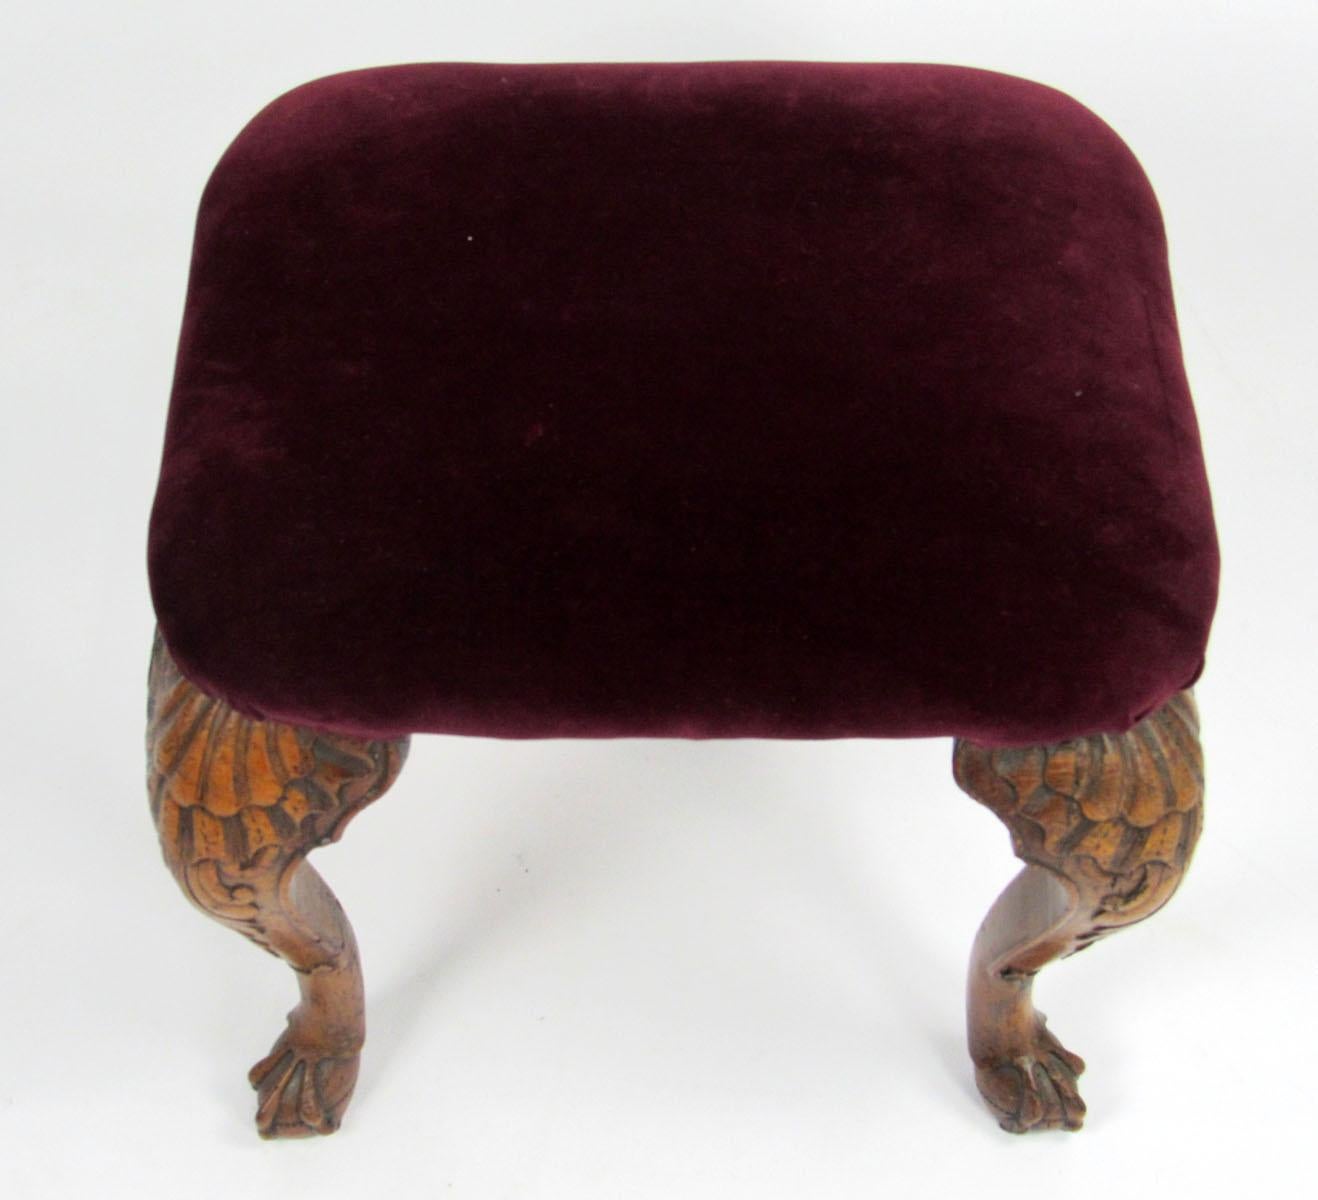 18th century English mahogany footstool with a shell and scroll design carved into the legs above ball and claw feet, and upholstered in a burgundy velvet fabric.